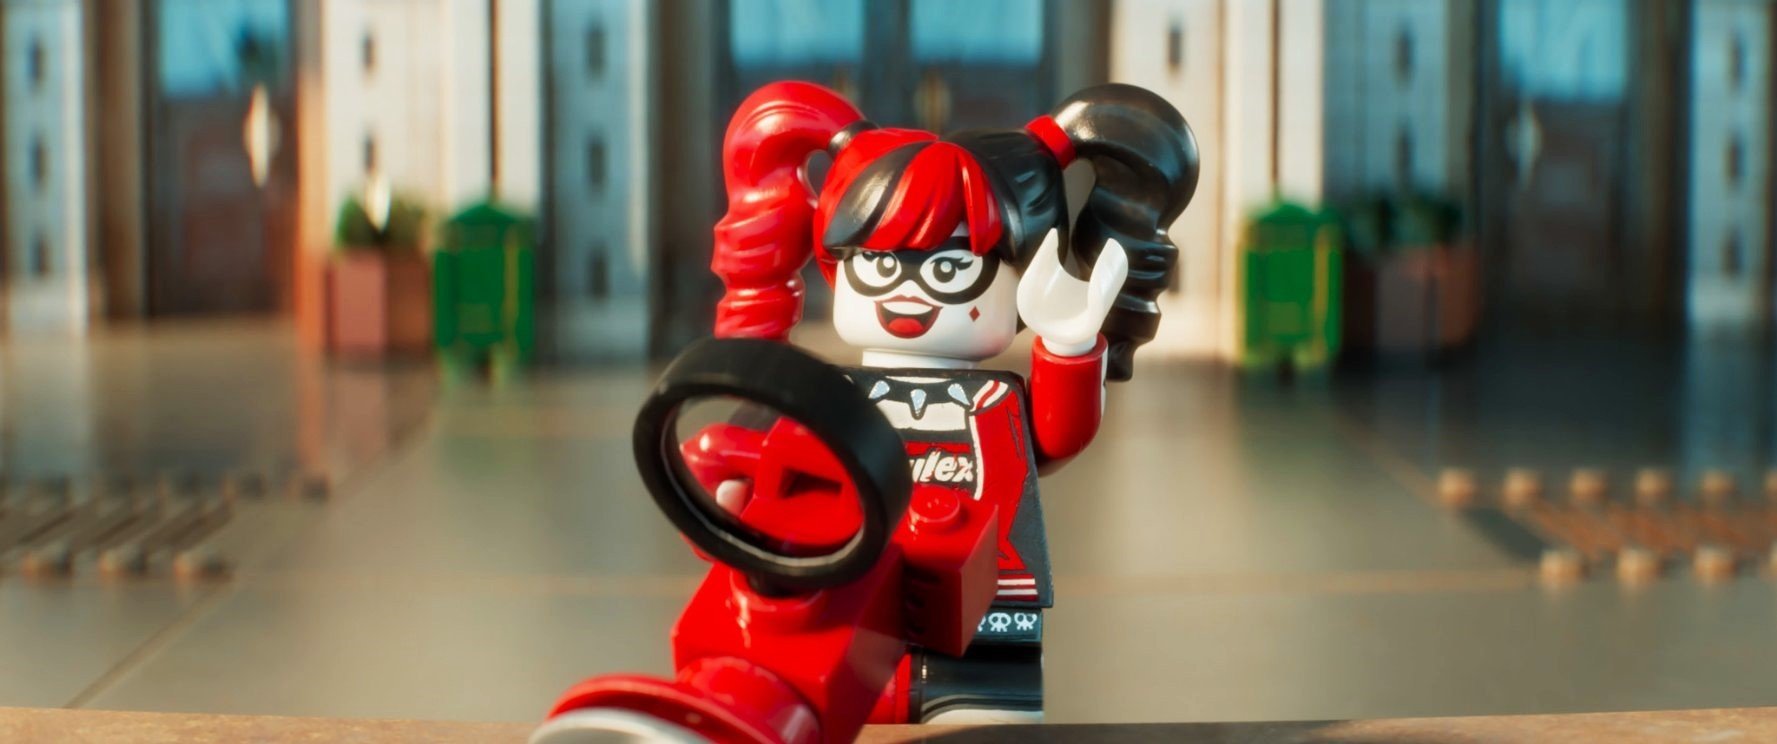 Harley Quinn from Warner Bros. Pictures' The Lego Batman Movie (2017)